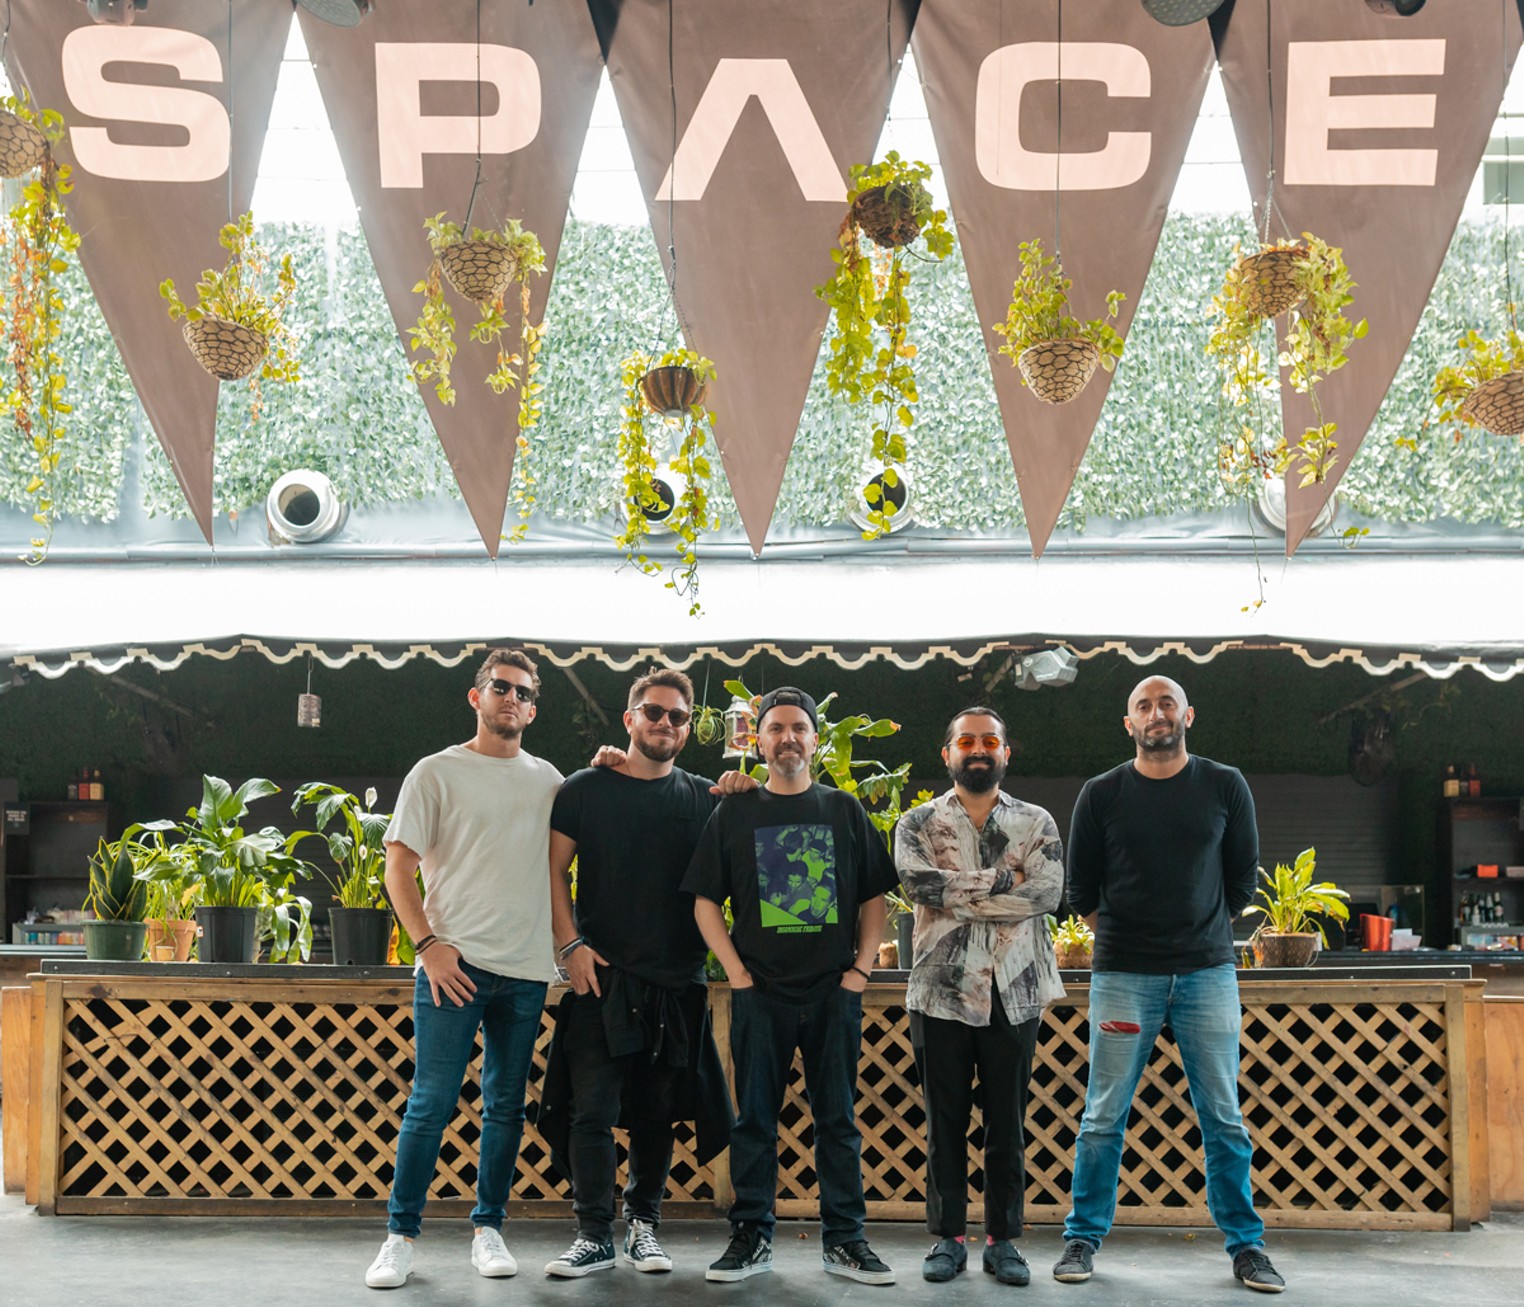 Club Space Miami Is Under New Ownership, Getting a New Look